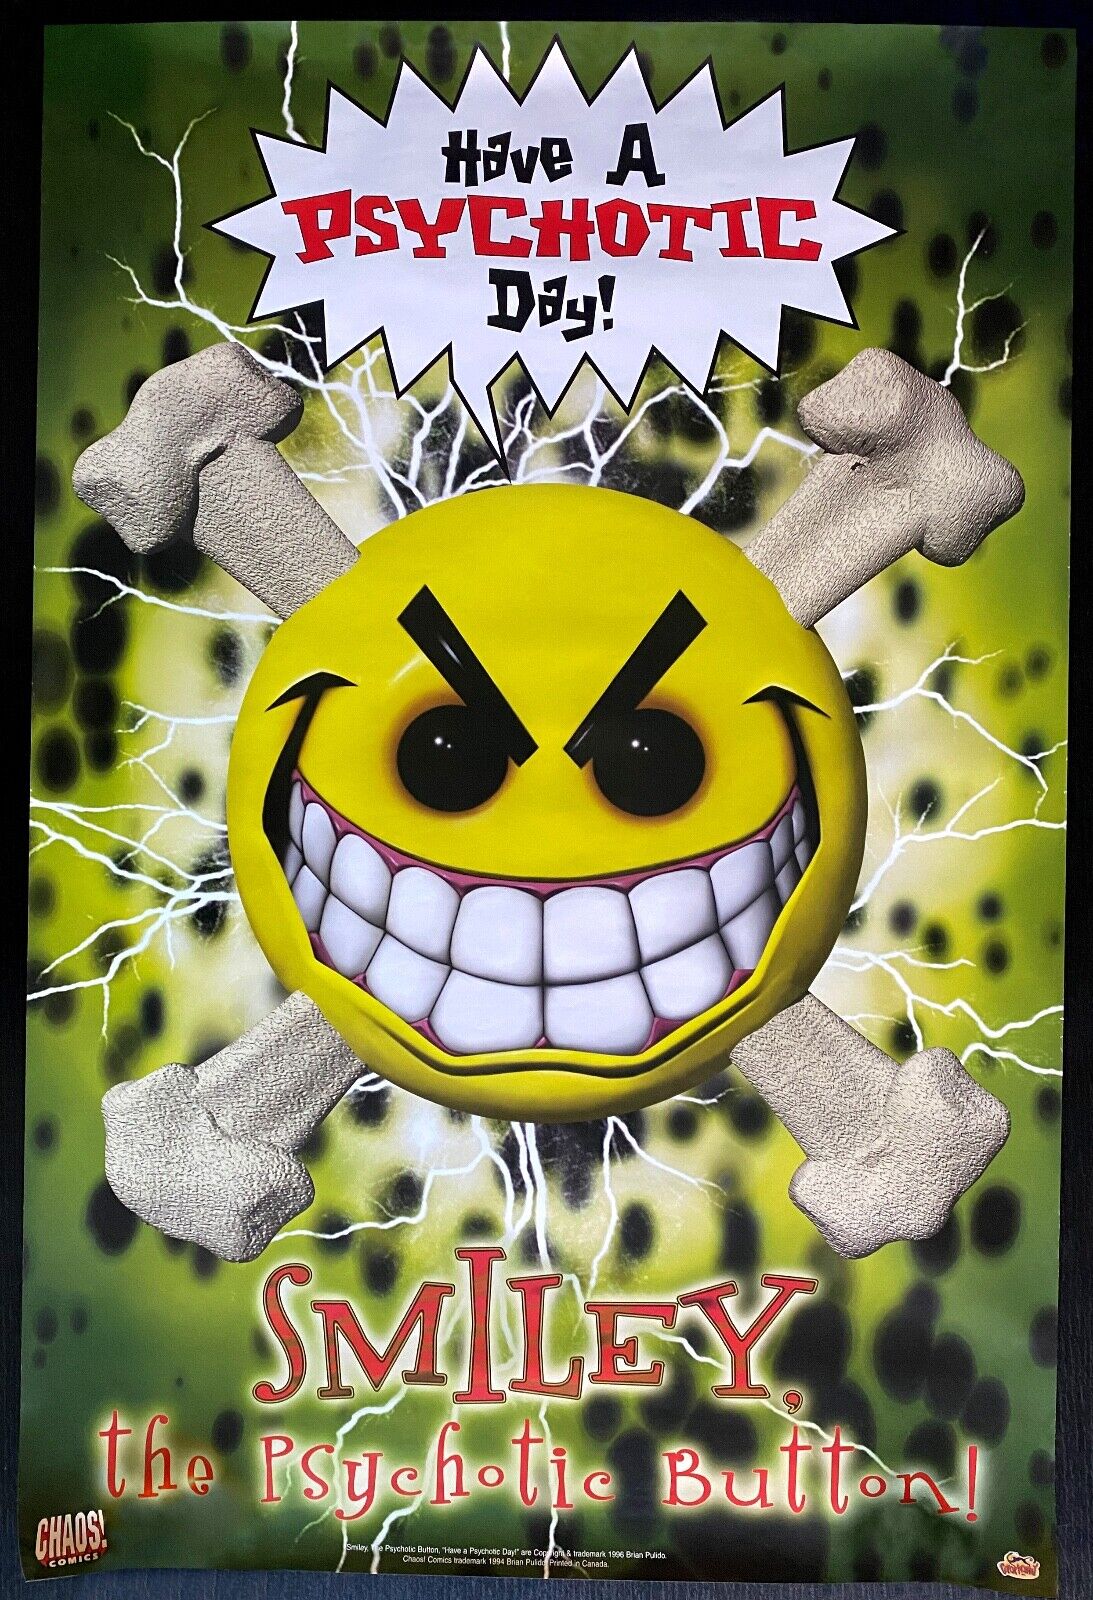 Brand New 1996 Chaos Comics Smiley the Psychotic Button Poster VHTF Vintage